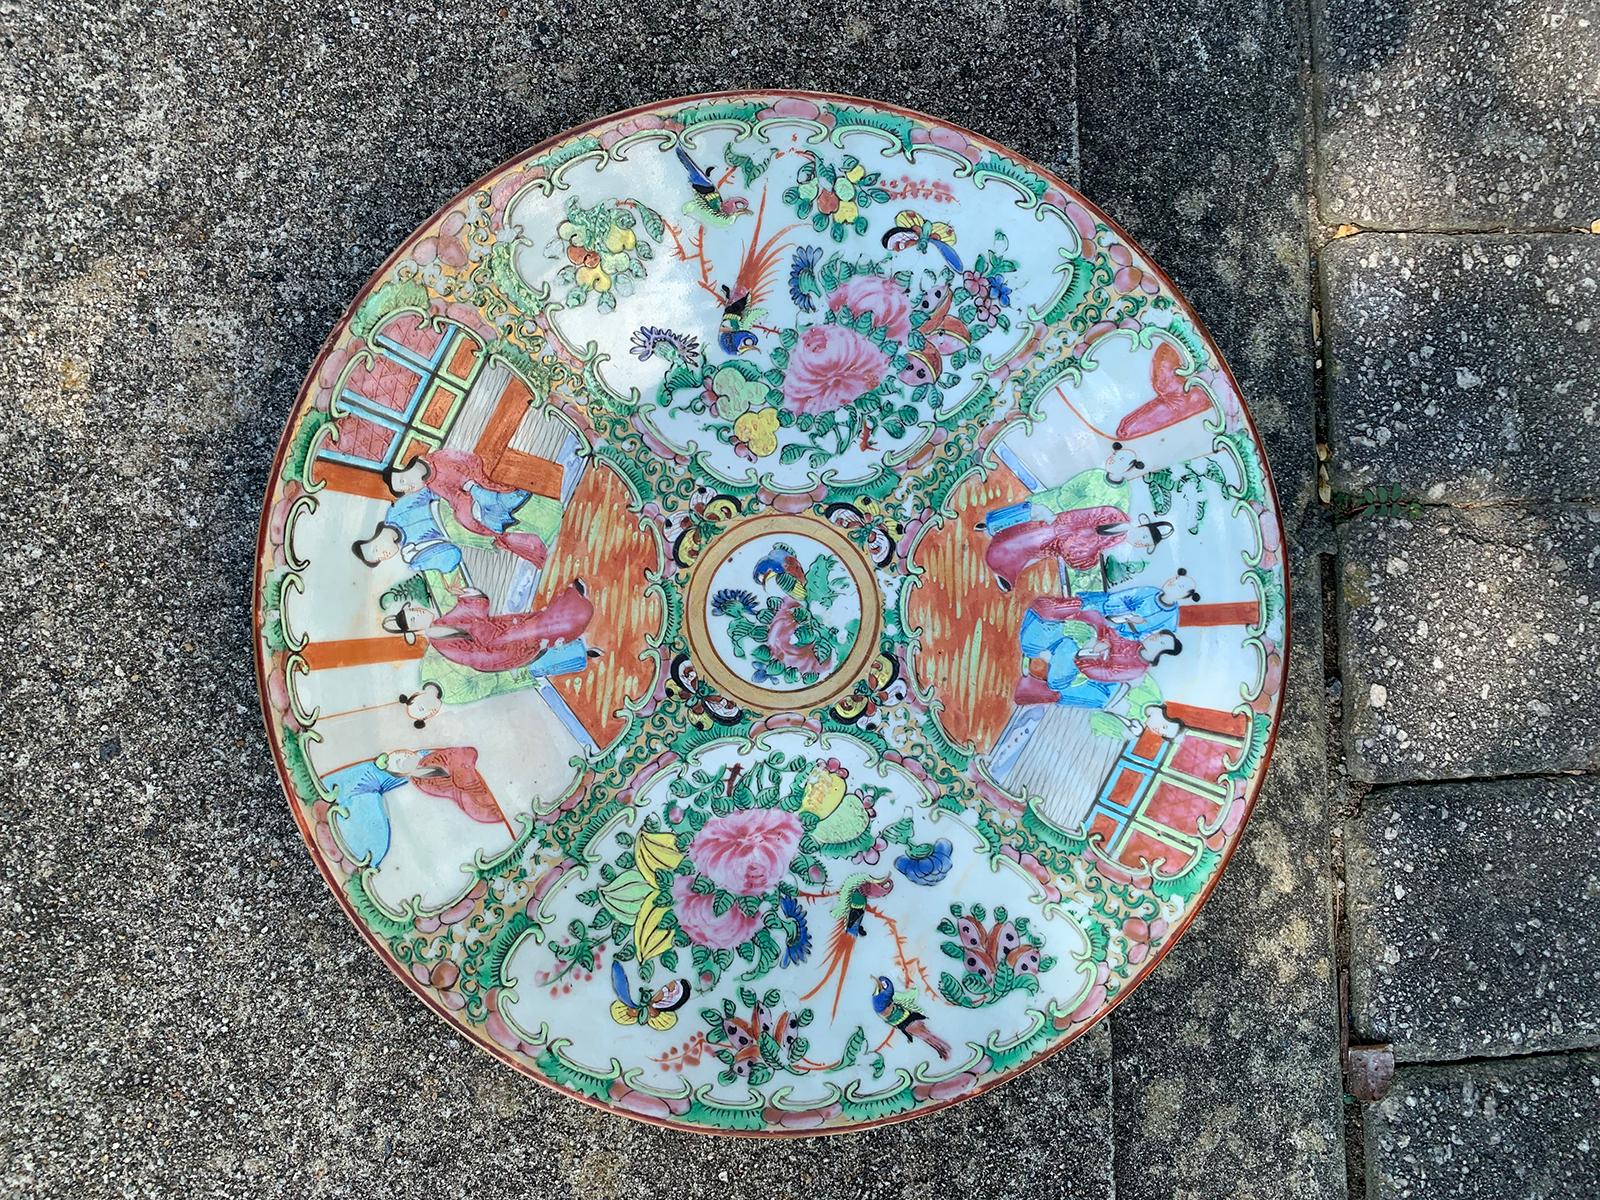 19th-20th century Chinese rose medallion porcelain charger.